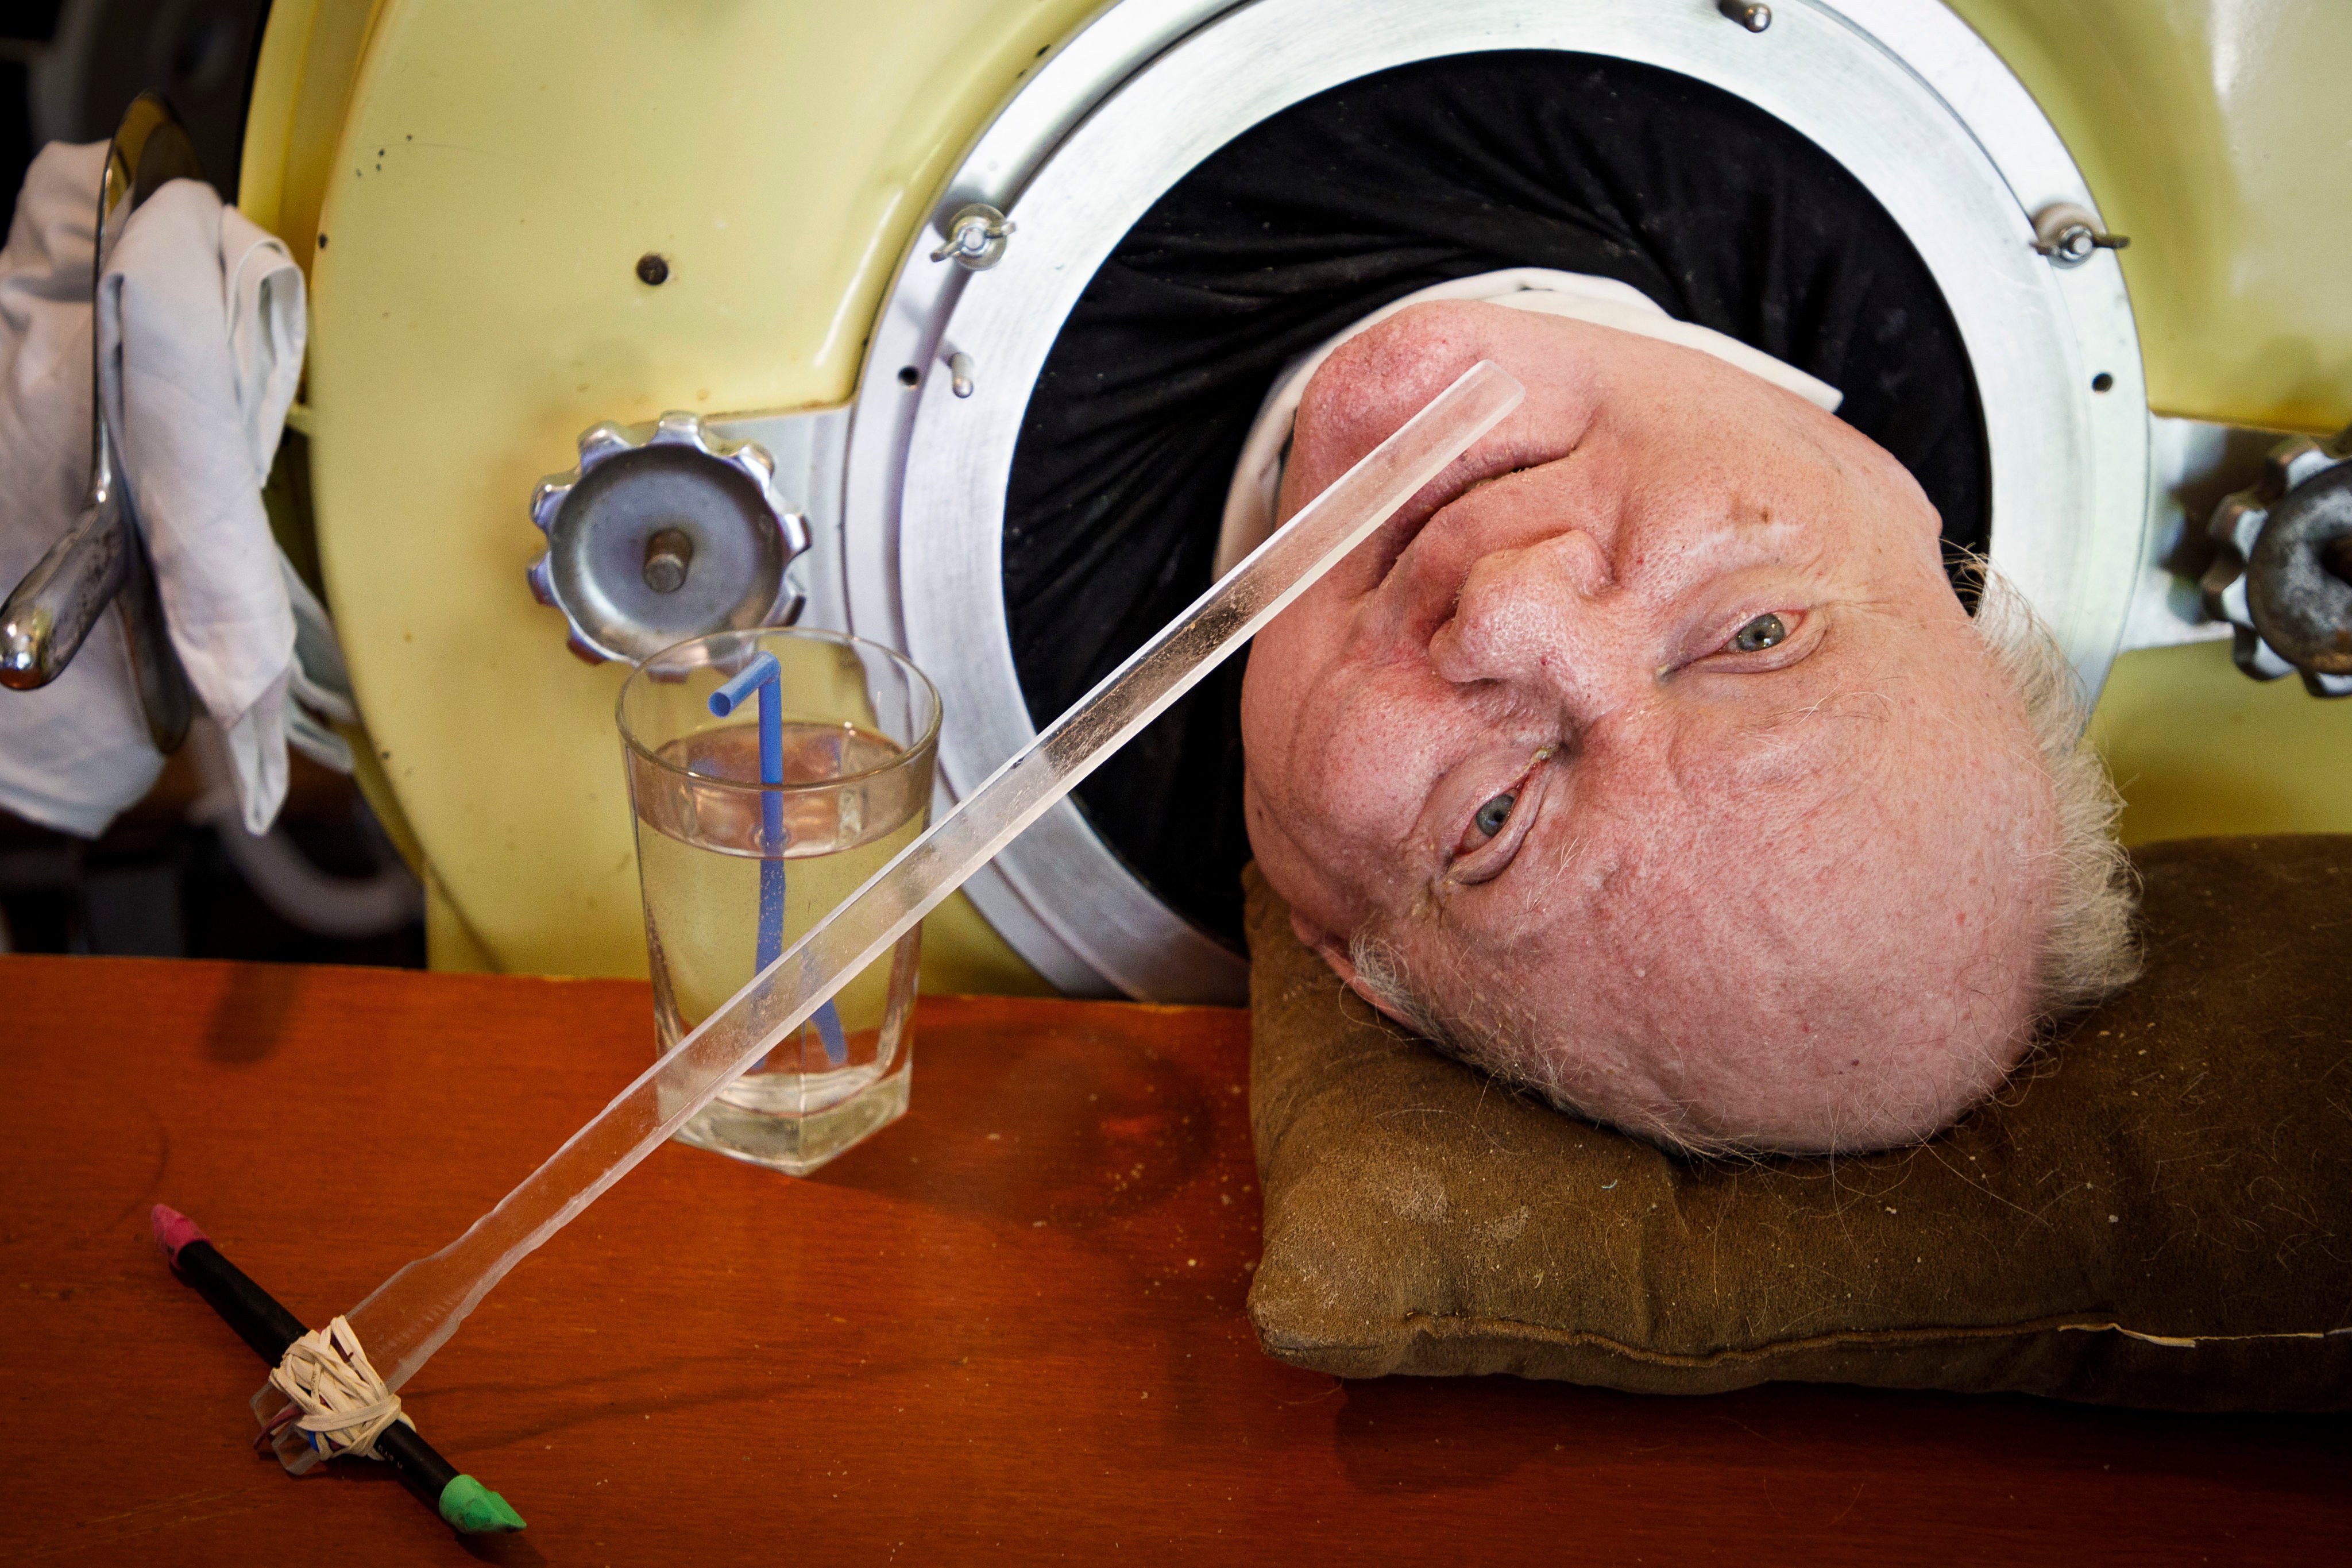 Paul Alexander looks out from inside his iron lung at his home in Dallas, Texas, in April 2018. Photo: The Dallas Morning News via AP